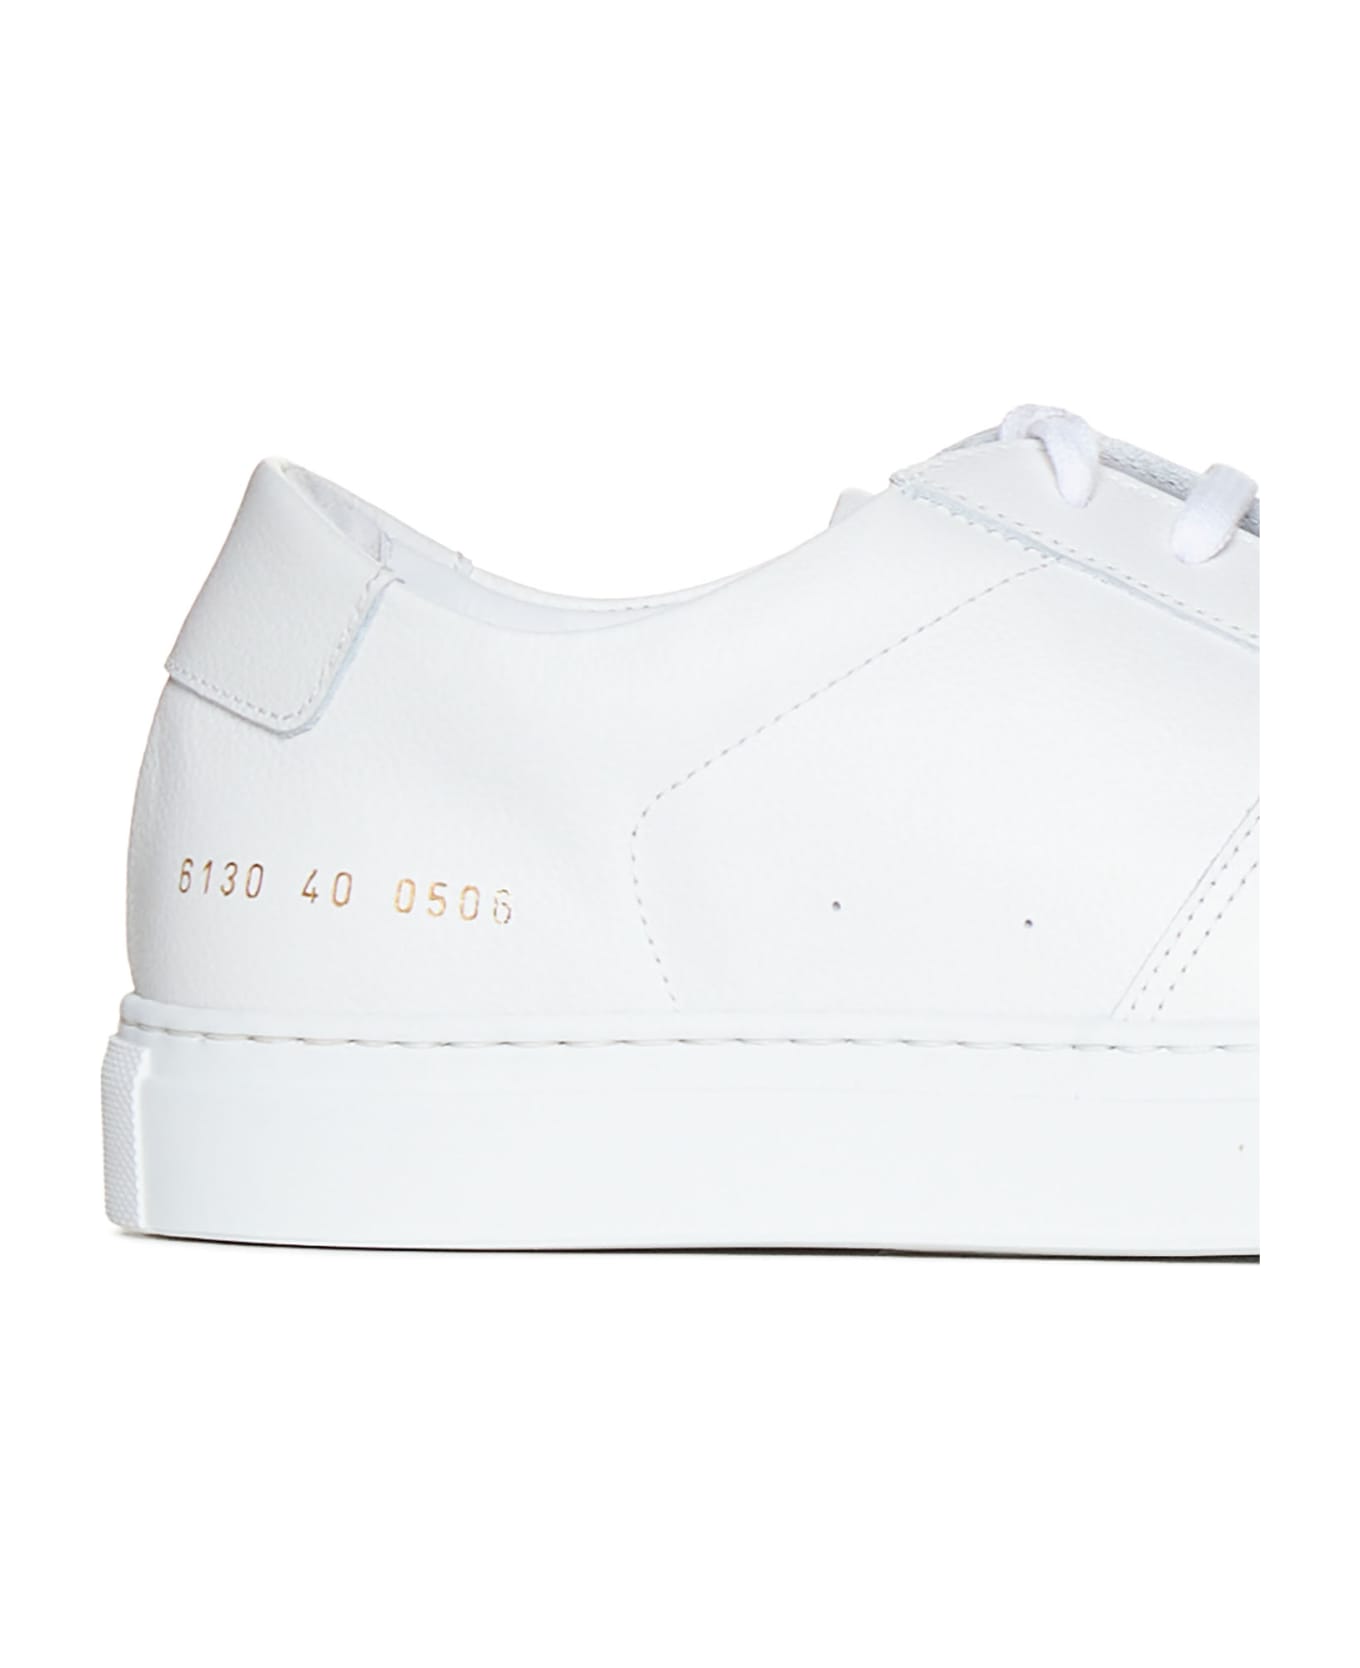 Common Projects Bball Classic Leather Sneakers - White スニーカー